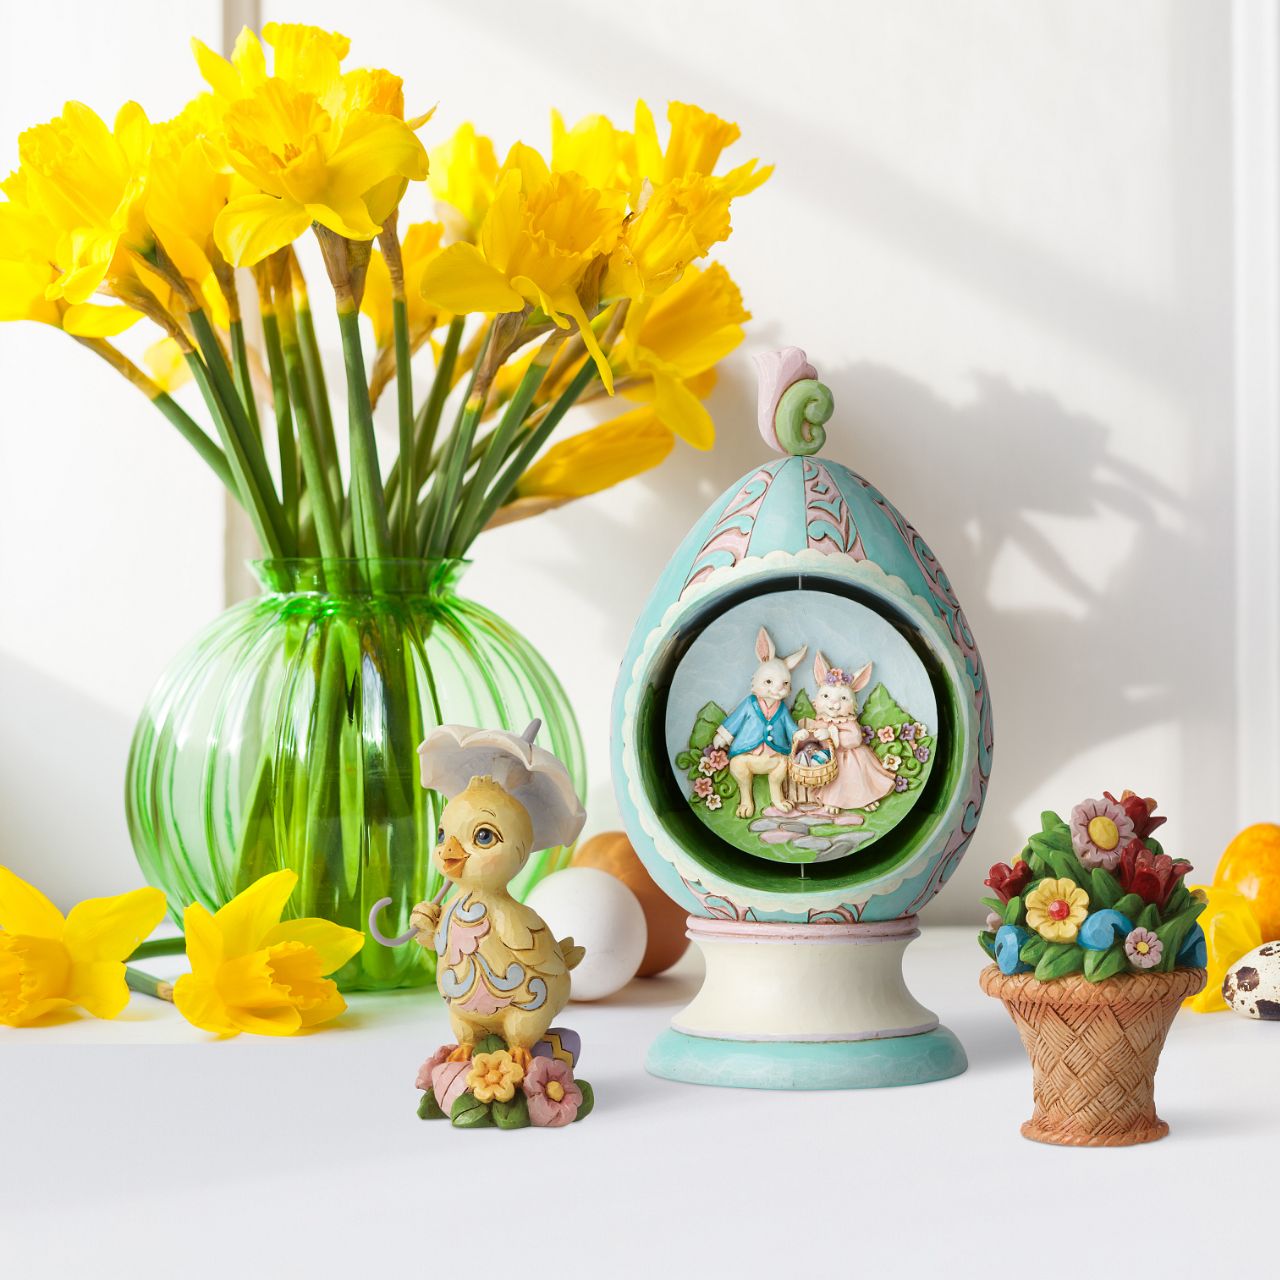 Revolving Egg with Bunnies and Chicks Scene Figurine by Jim Shore  Stroll through Spring with this festive Jim Shore tabletop Easter egg. Simply turn the floral finial atop the egg to rotate the scene inside between two adorable Easter scenes. Chicks soak in the sun while a pair of bunnies jubilantly collect eggs.